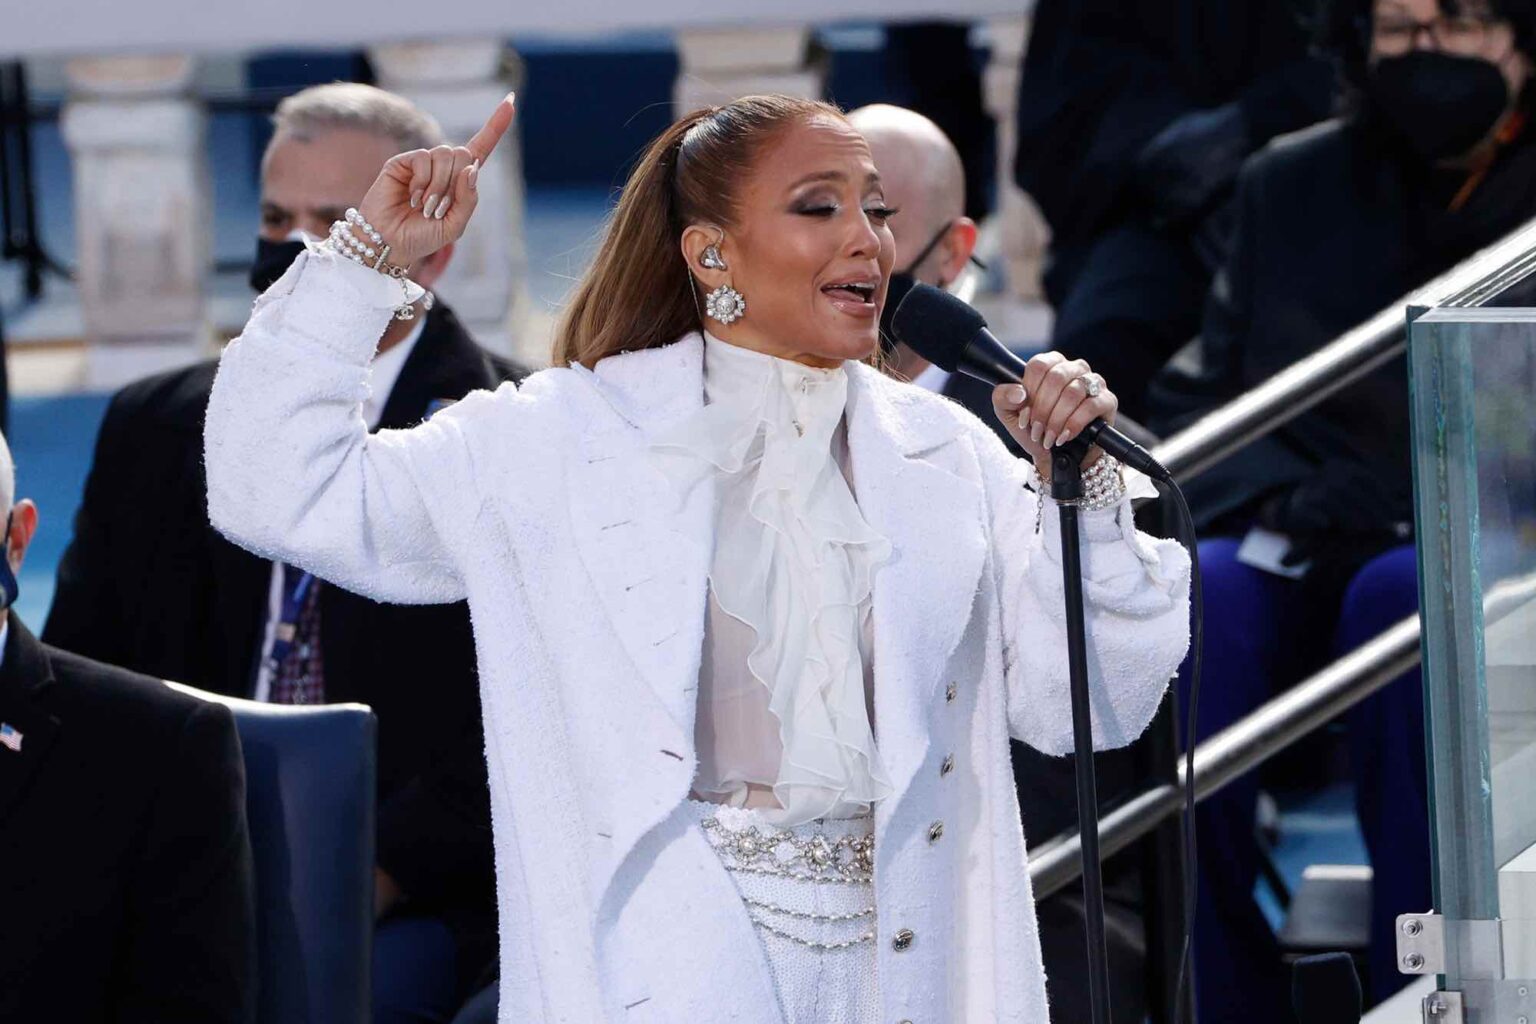 LET'S GET LOUD! See how Jennifer Lopez is celebrating her second album's anniversary on Instagram and Twitter.